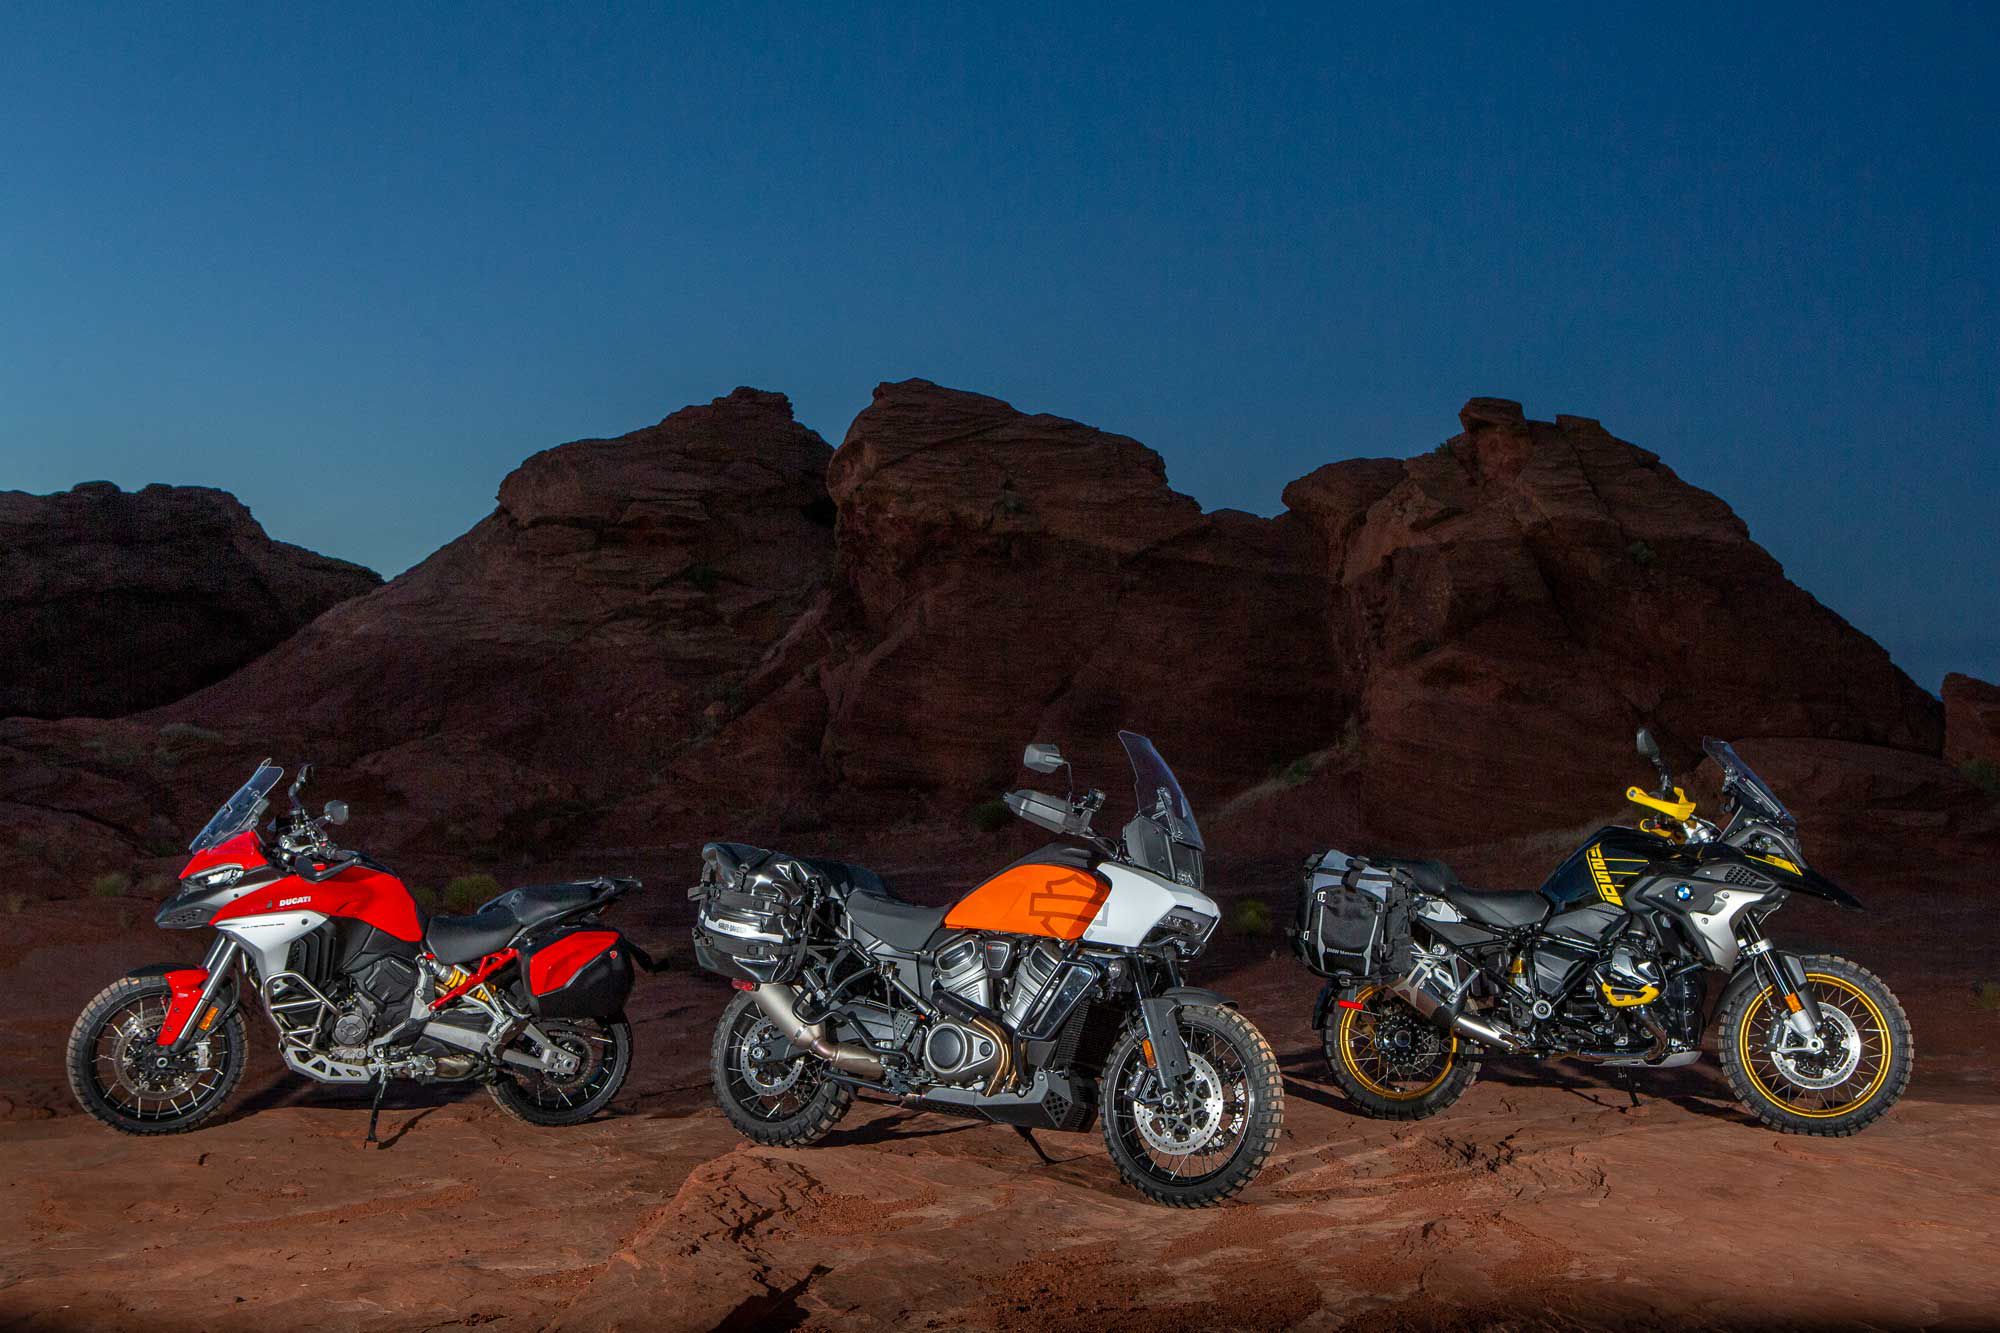 Harley-Davidson’s Pan America 1250 Special is a new addition to the big-bore adventuring-touring segment and is looking to knock the BMW R 1250 GS off its throne as king. Ducati has every intention of doing the very same thing with its all-new Multistrada V4 S. This is shaping up to be one serious ADV showdown, indeed.